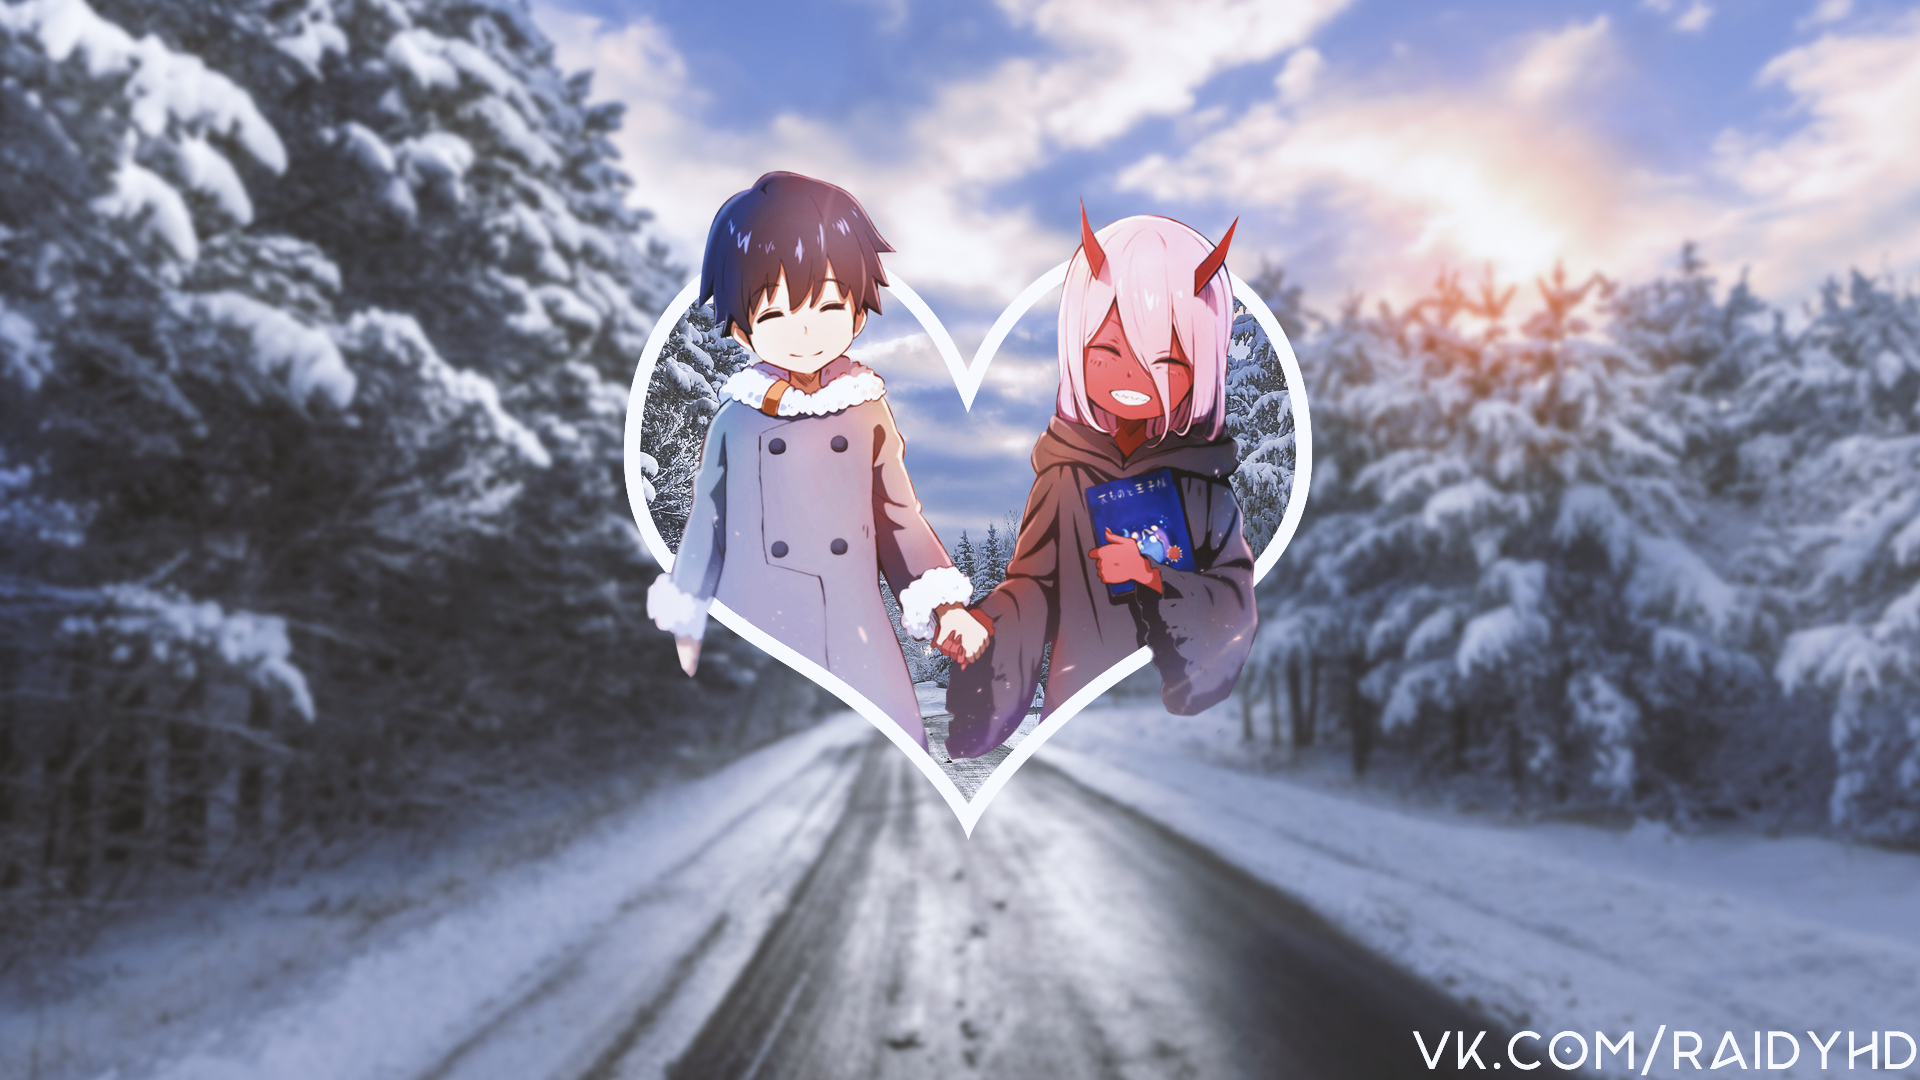 Anime 1920x1080 anime girls anime Zero Two (Darling in the FranXX) winter picture-in-picture Darling in the FranXX